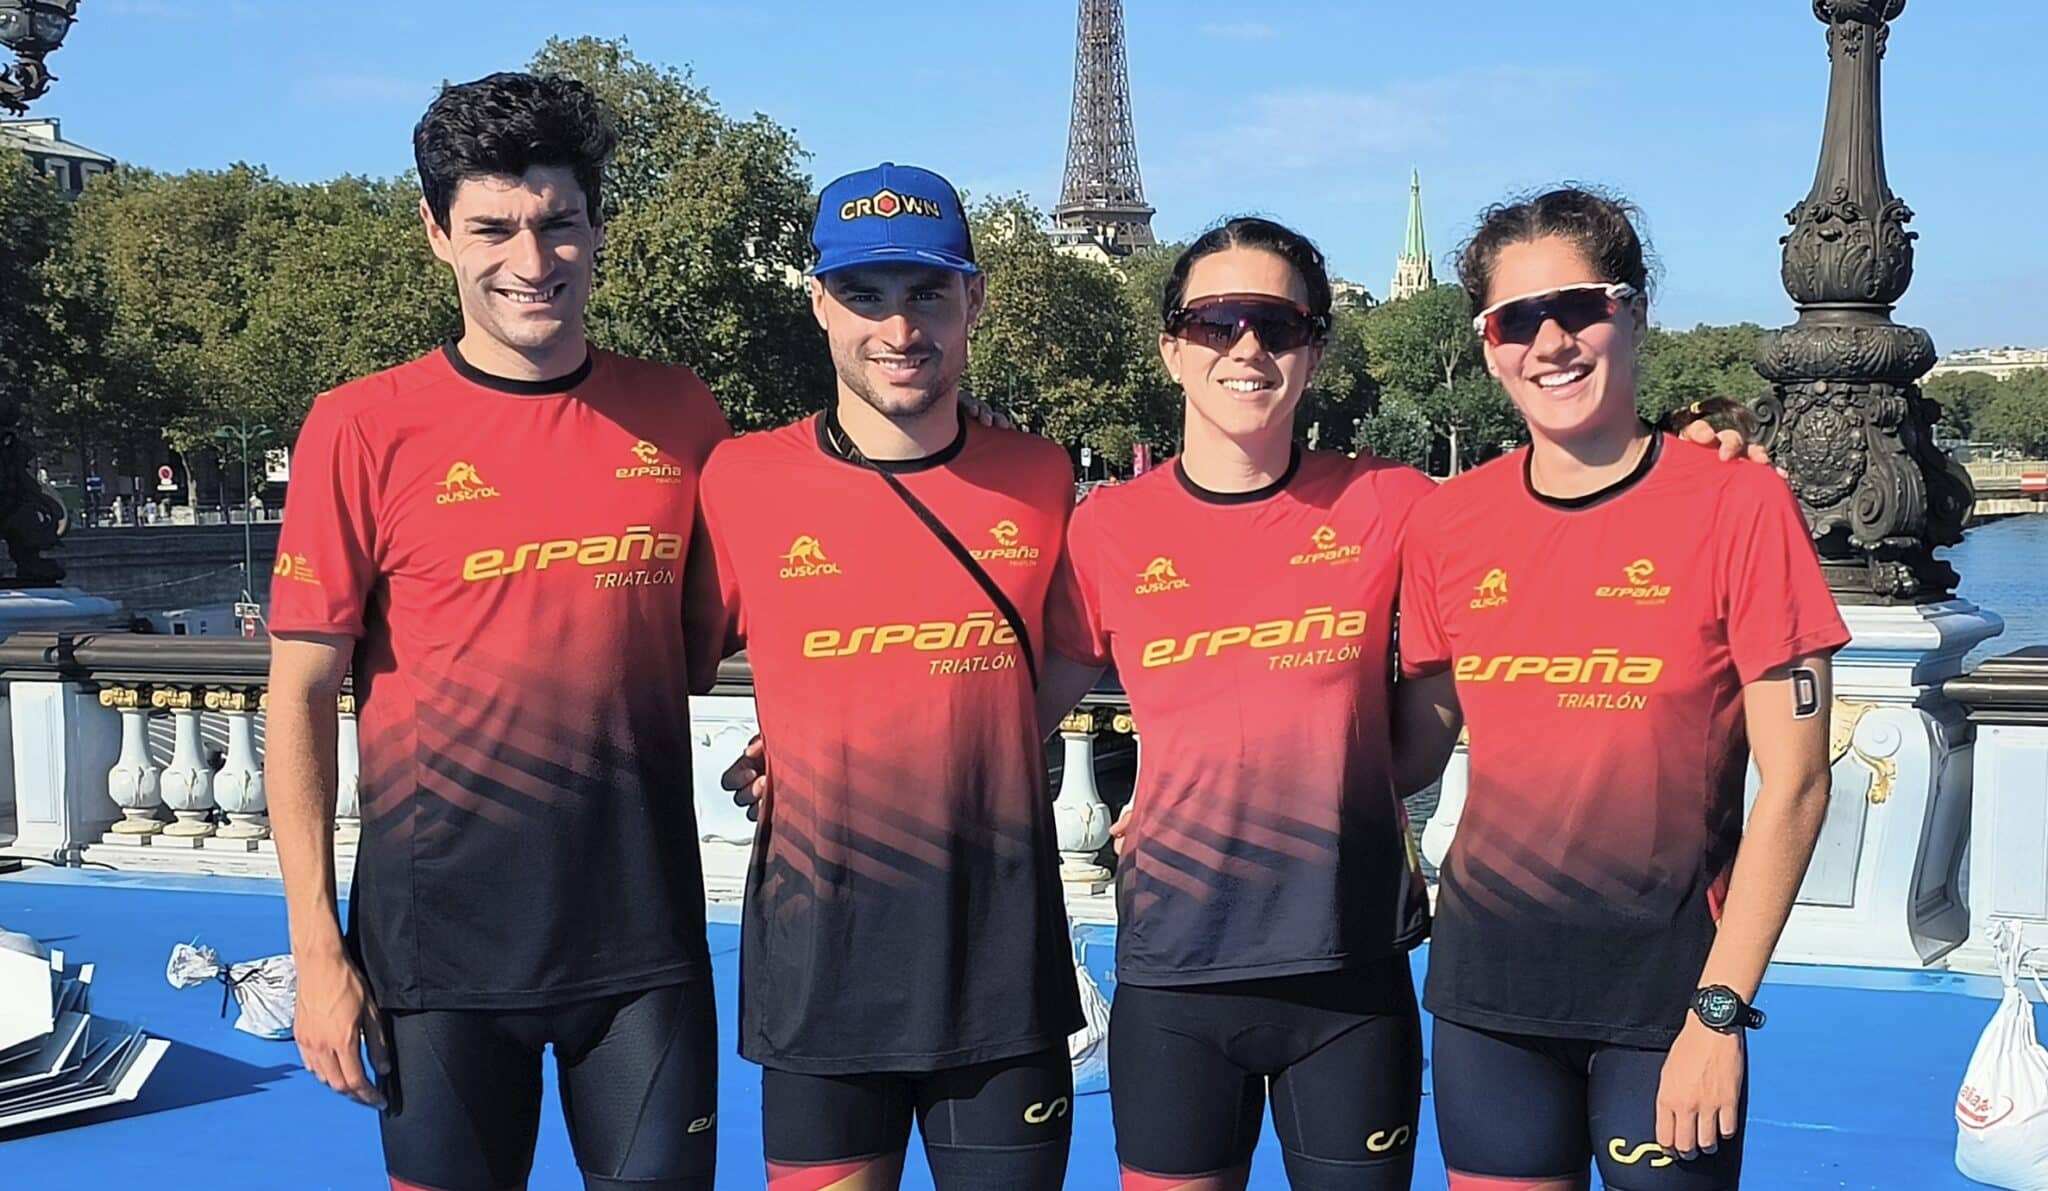 FETRI/ Mixed Relay in the Paris Event Test